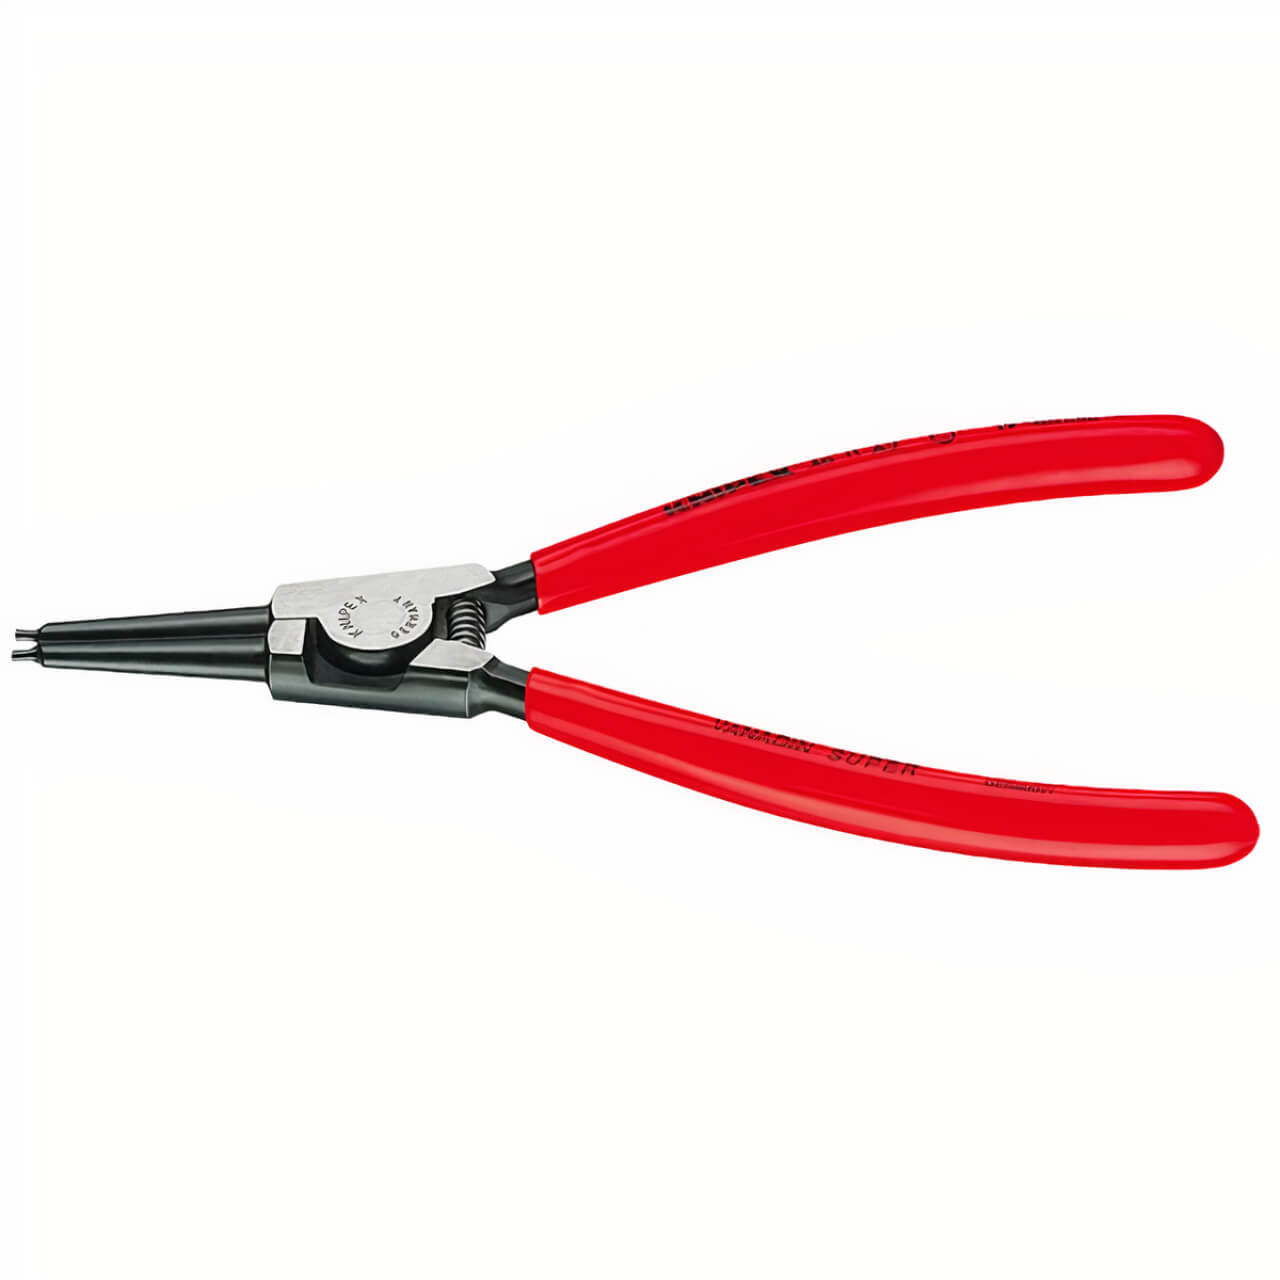 Knipex 180mm Straight Tip 19-60mm External Circlip Pliers